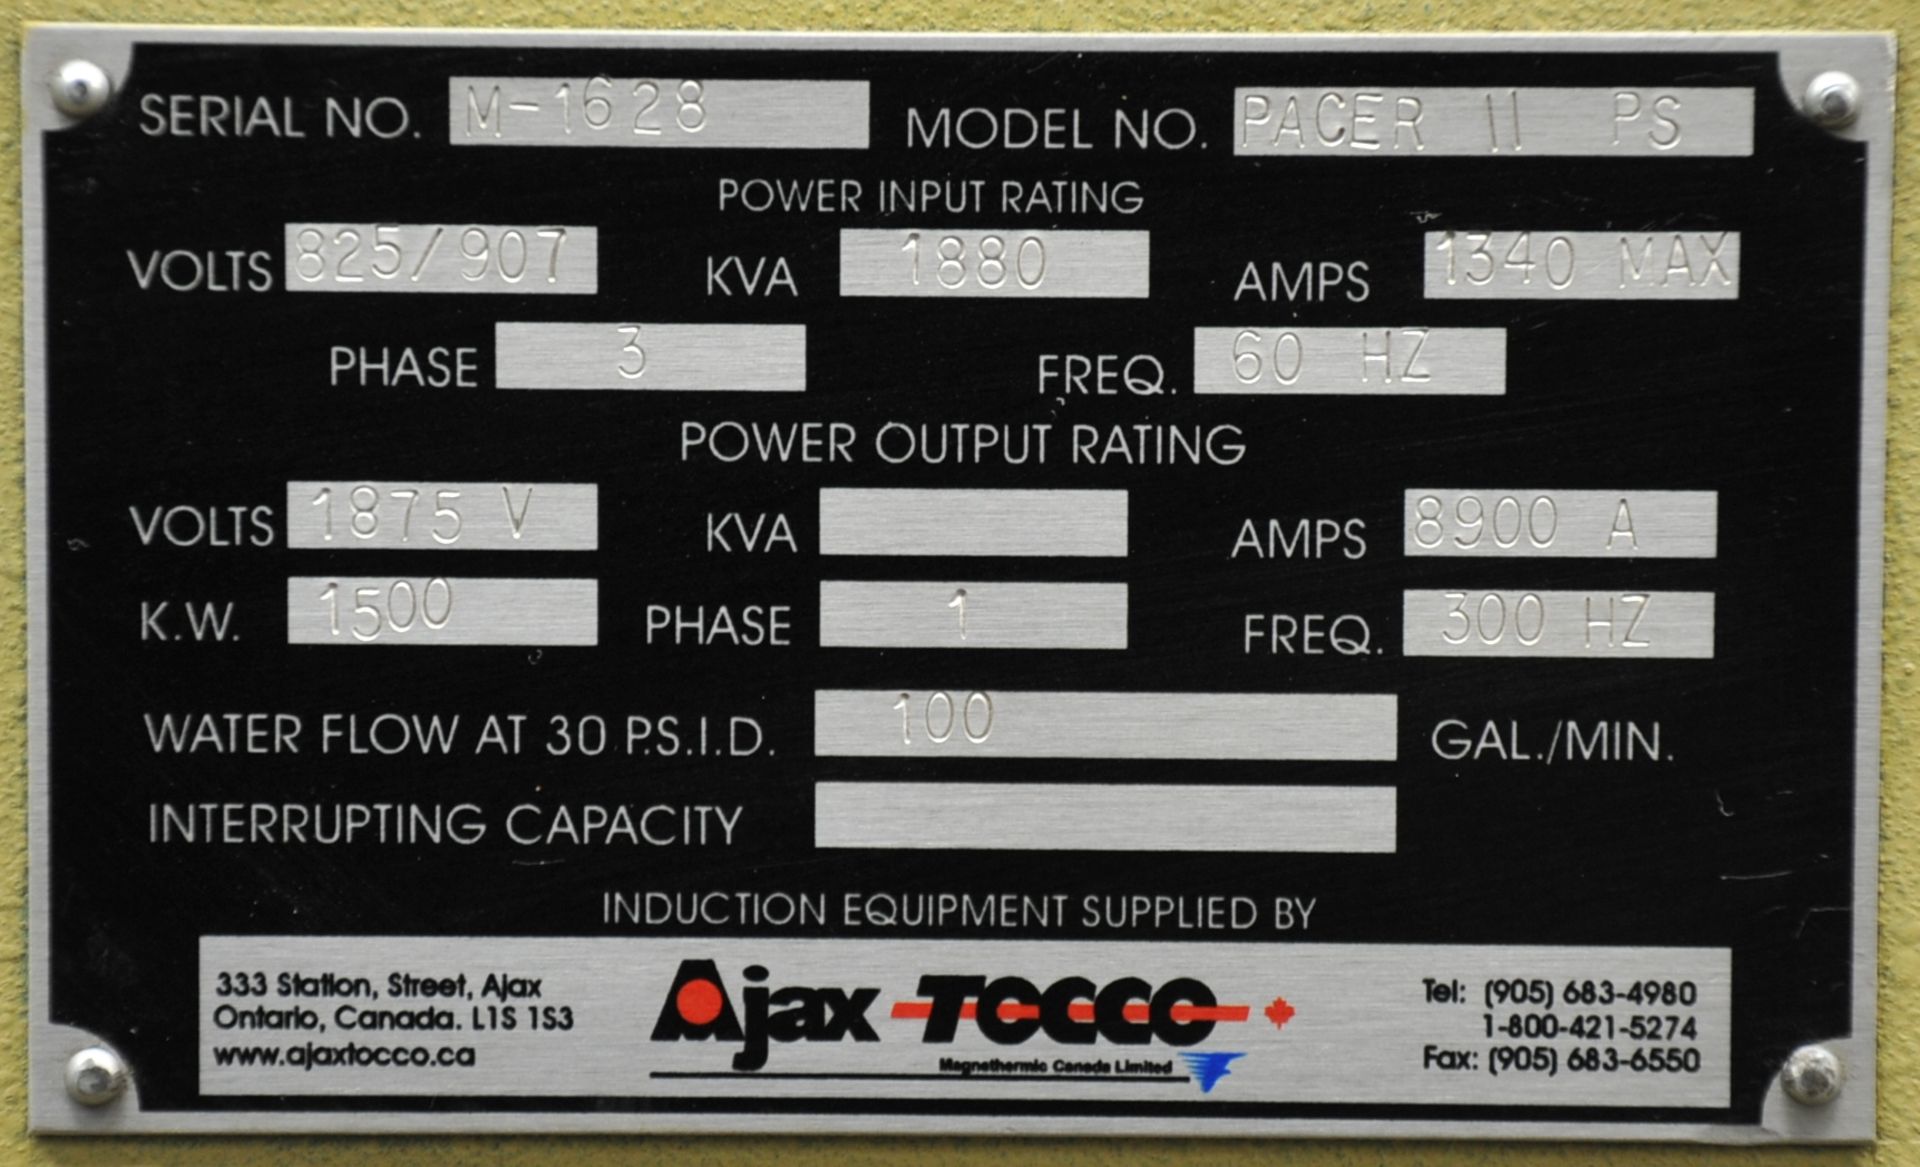 Ajax Tocco Model MFS-3 3 Ton Capacity Induction Melting Furnaces; Serial Number: M-14782-G2/G1 ( - Image 13 of 15